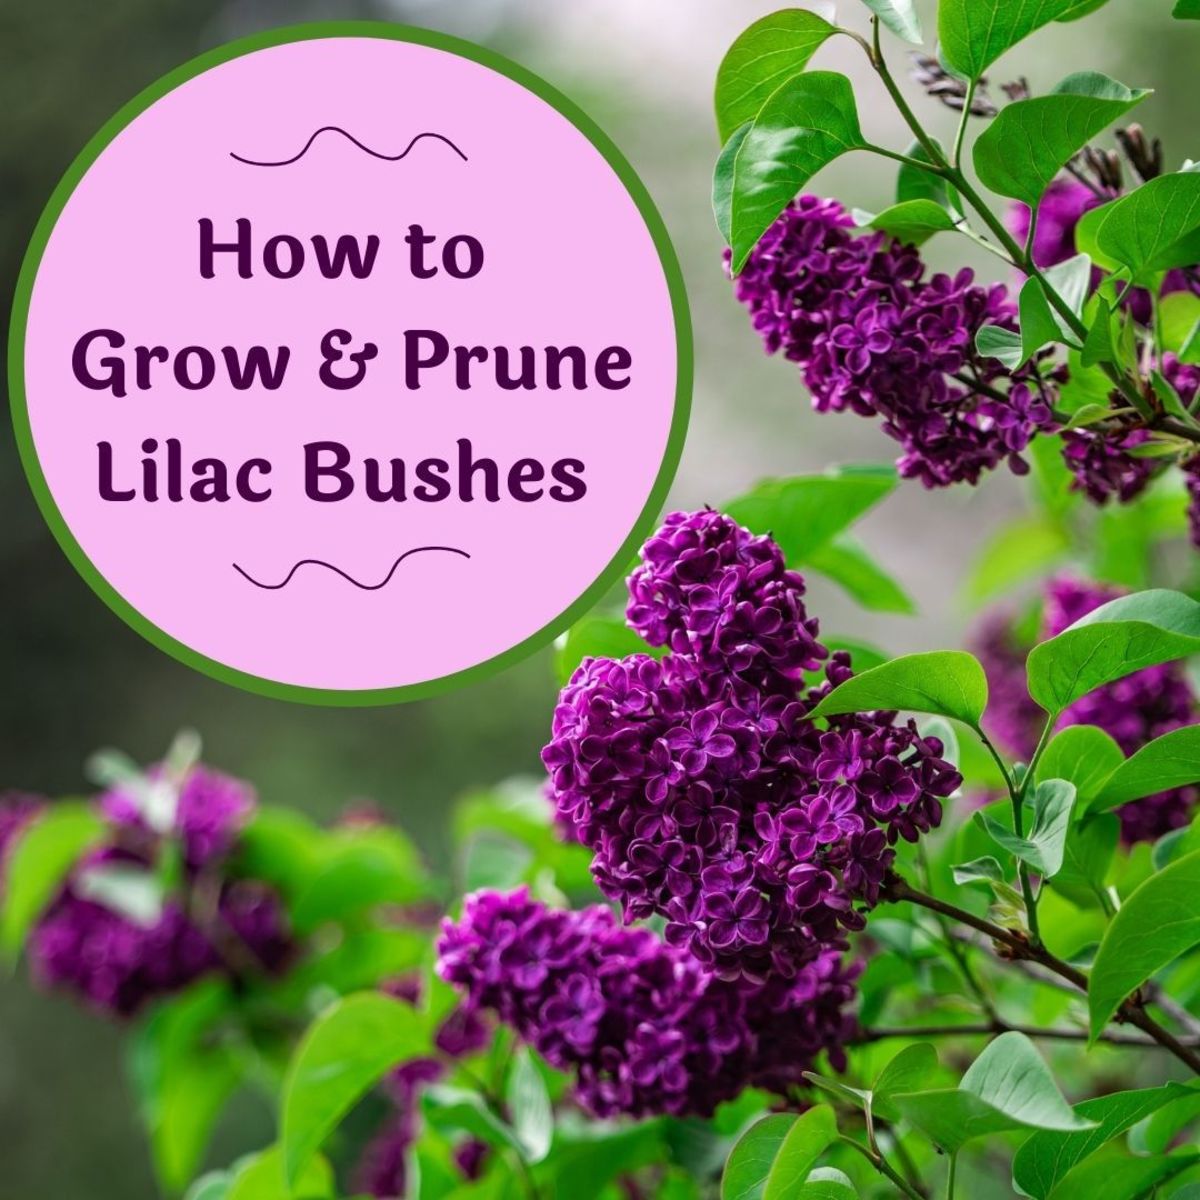 Lilac bushes are one of the easiest plants to grow in your garden, even if you have poor soil. 